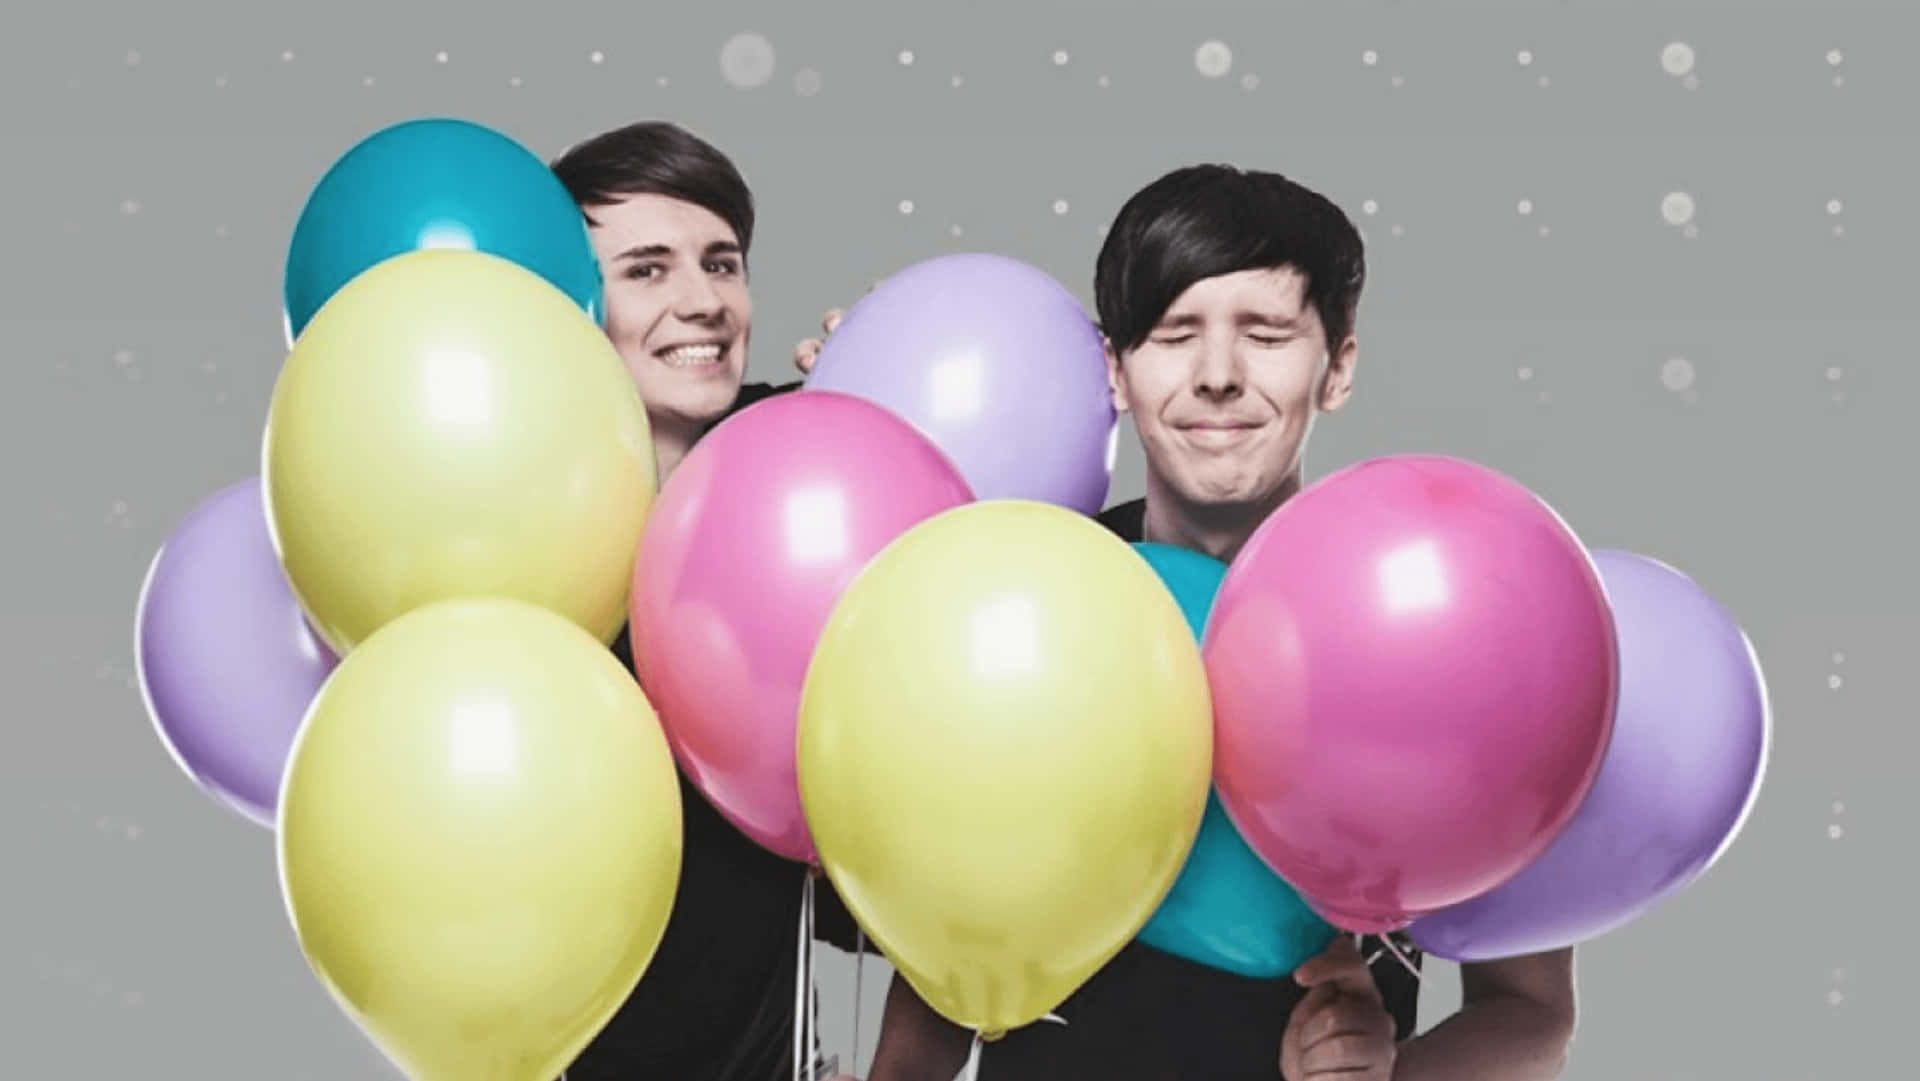 Best Friends Dan And Phil Bring Out The Best Of Each Other. Background